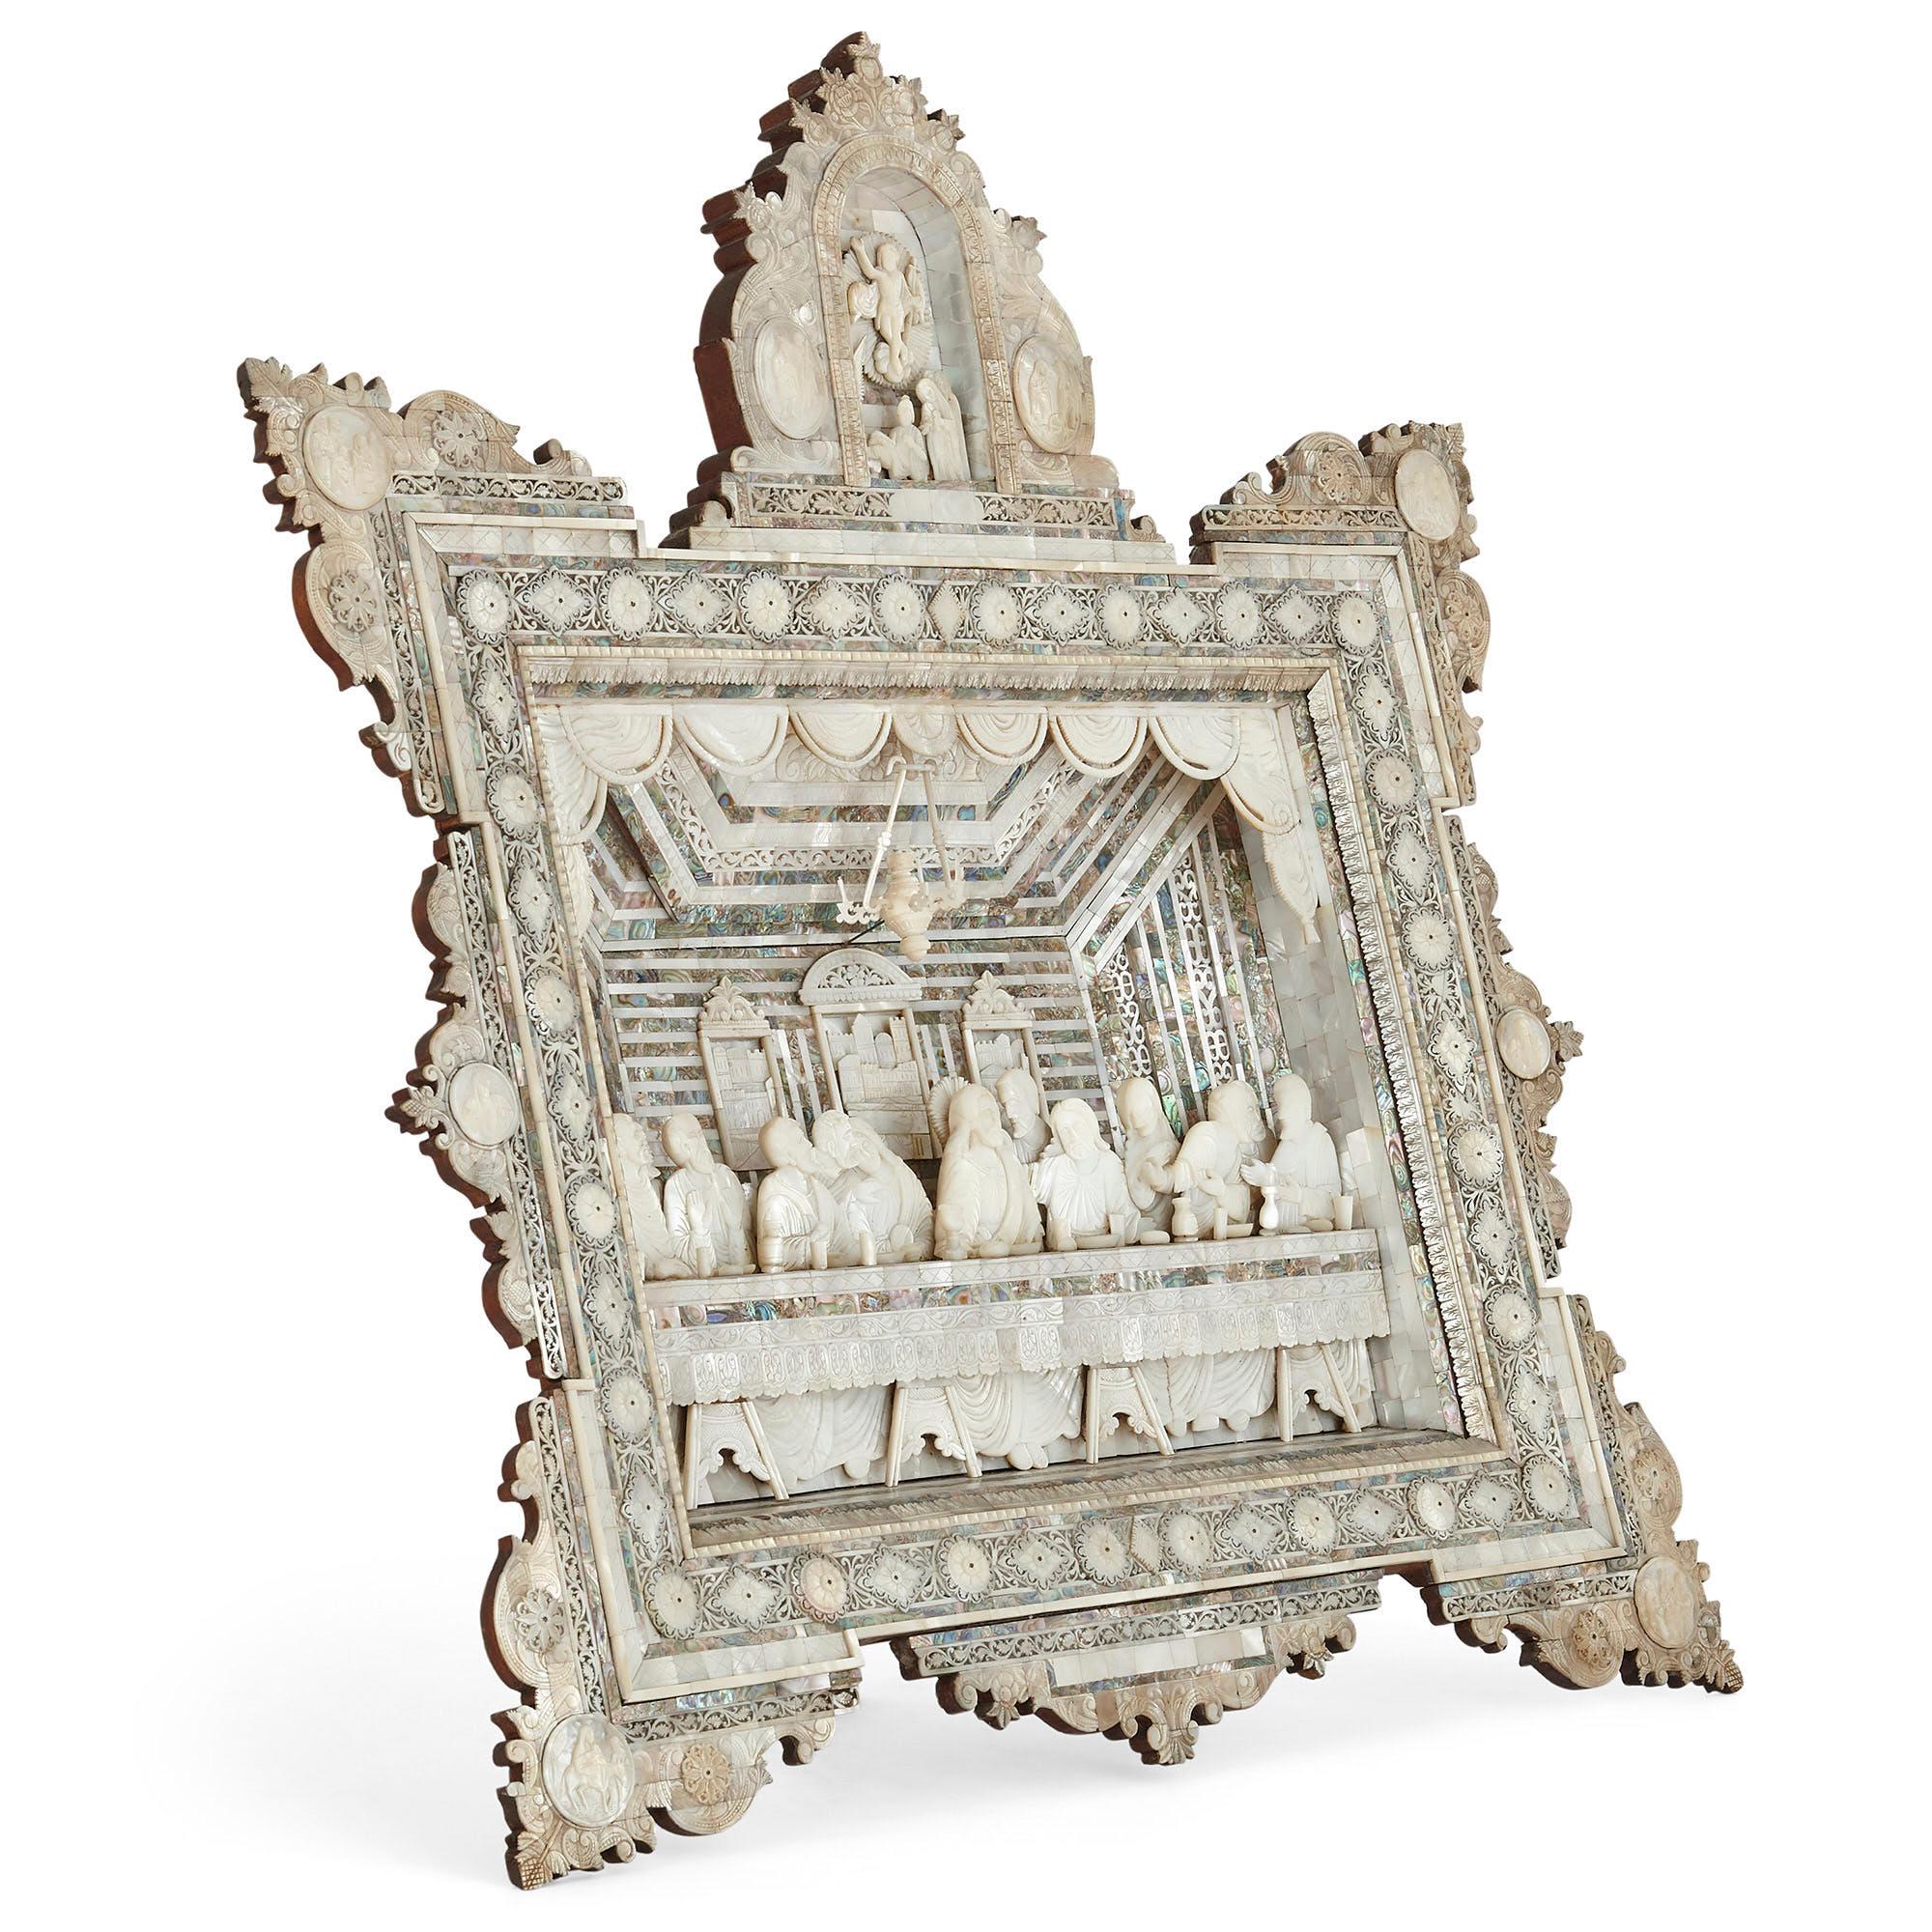 Antique carved mother of pearl and abalone last supper from Jerusalem
Jerusalem, late 19th century
Measures: Height 79cm, width 74cm, depth 20cm

This beautiful object is an icon depicting the last supper, crafted from mother of pearl and